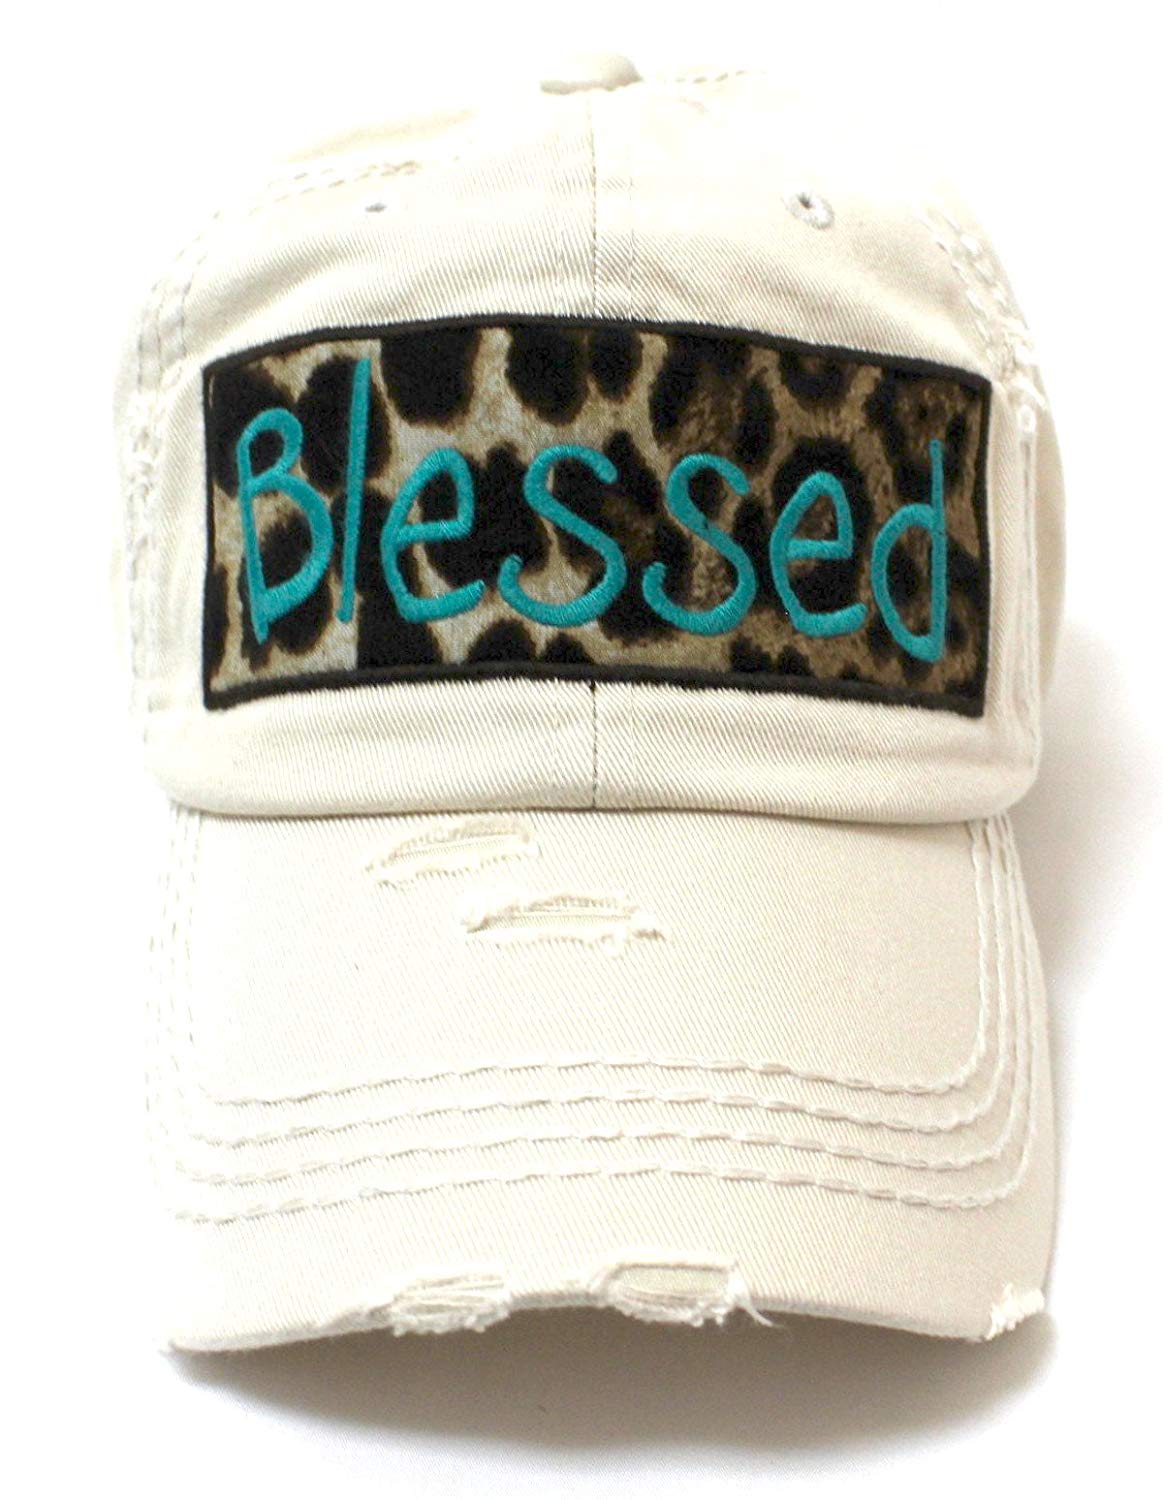 CAPS 'N VINTAGE Stone Ivory Blessed Leopard Patch Embroidery Hat - Caps 'N Vintage 